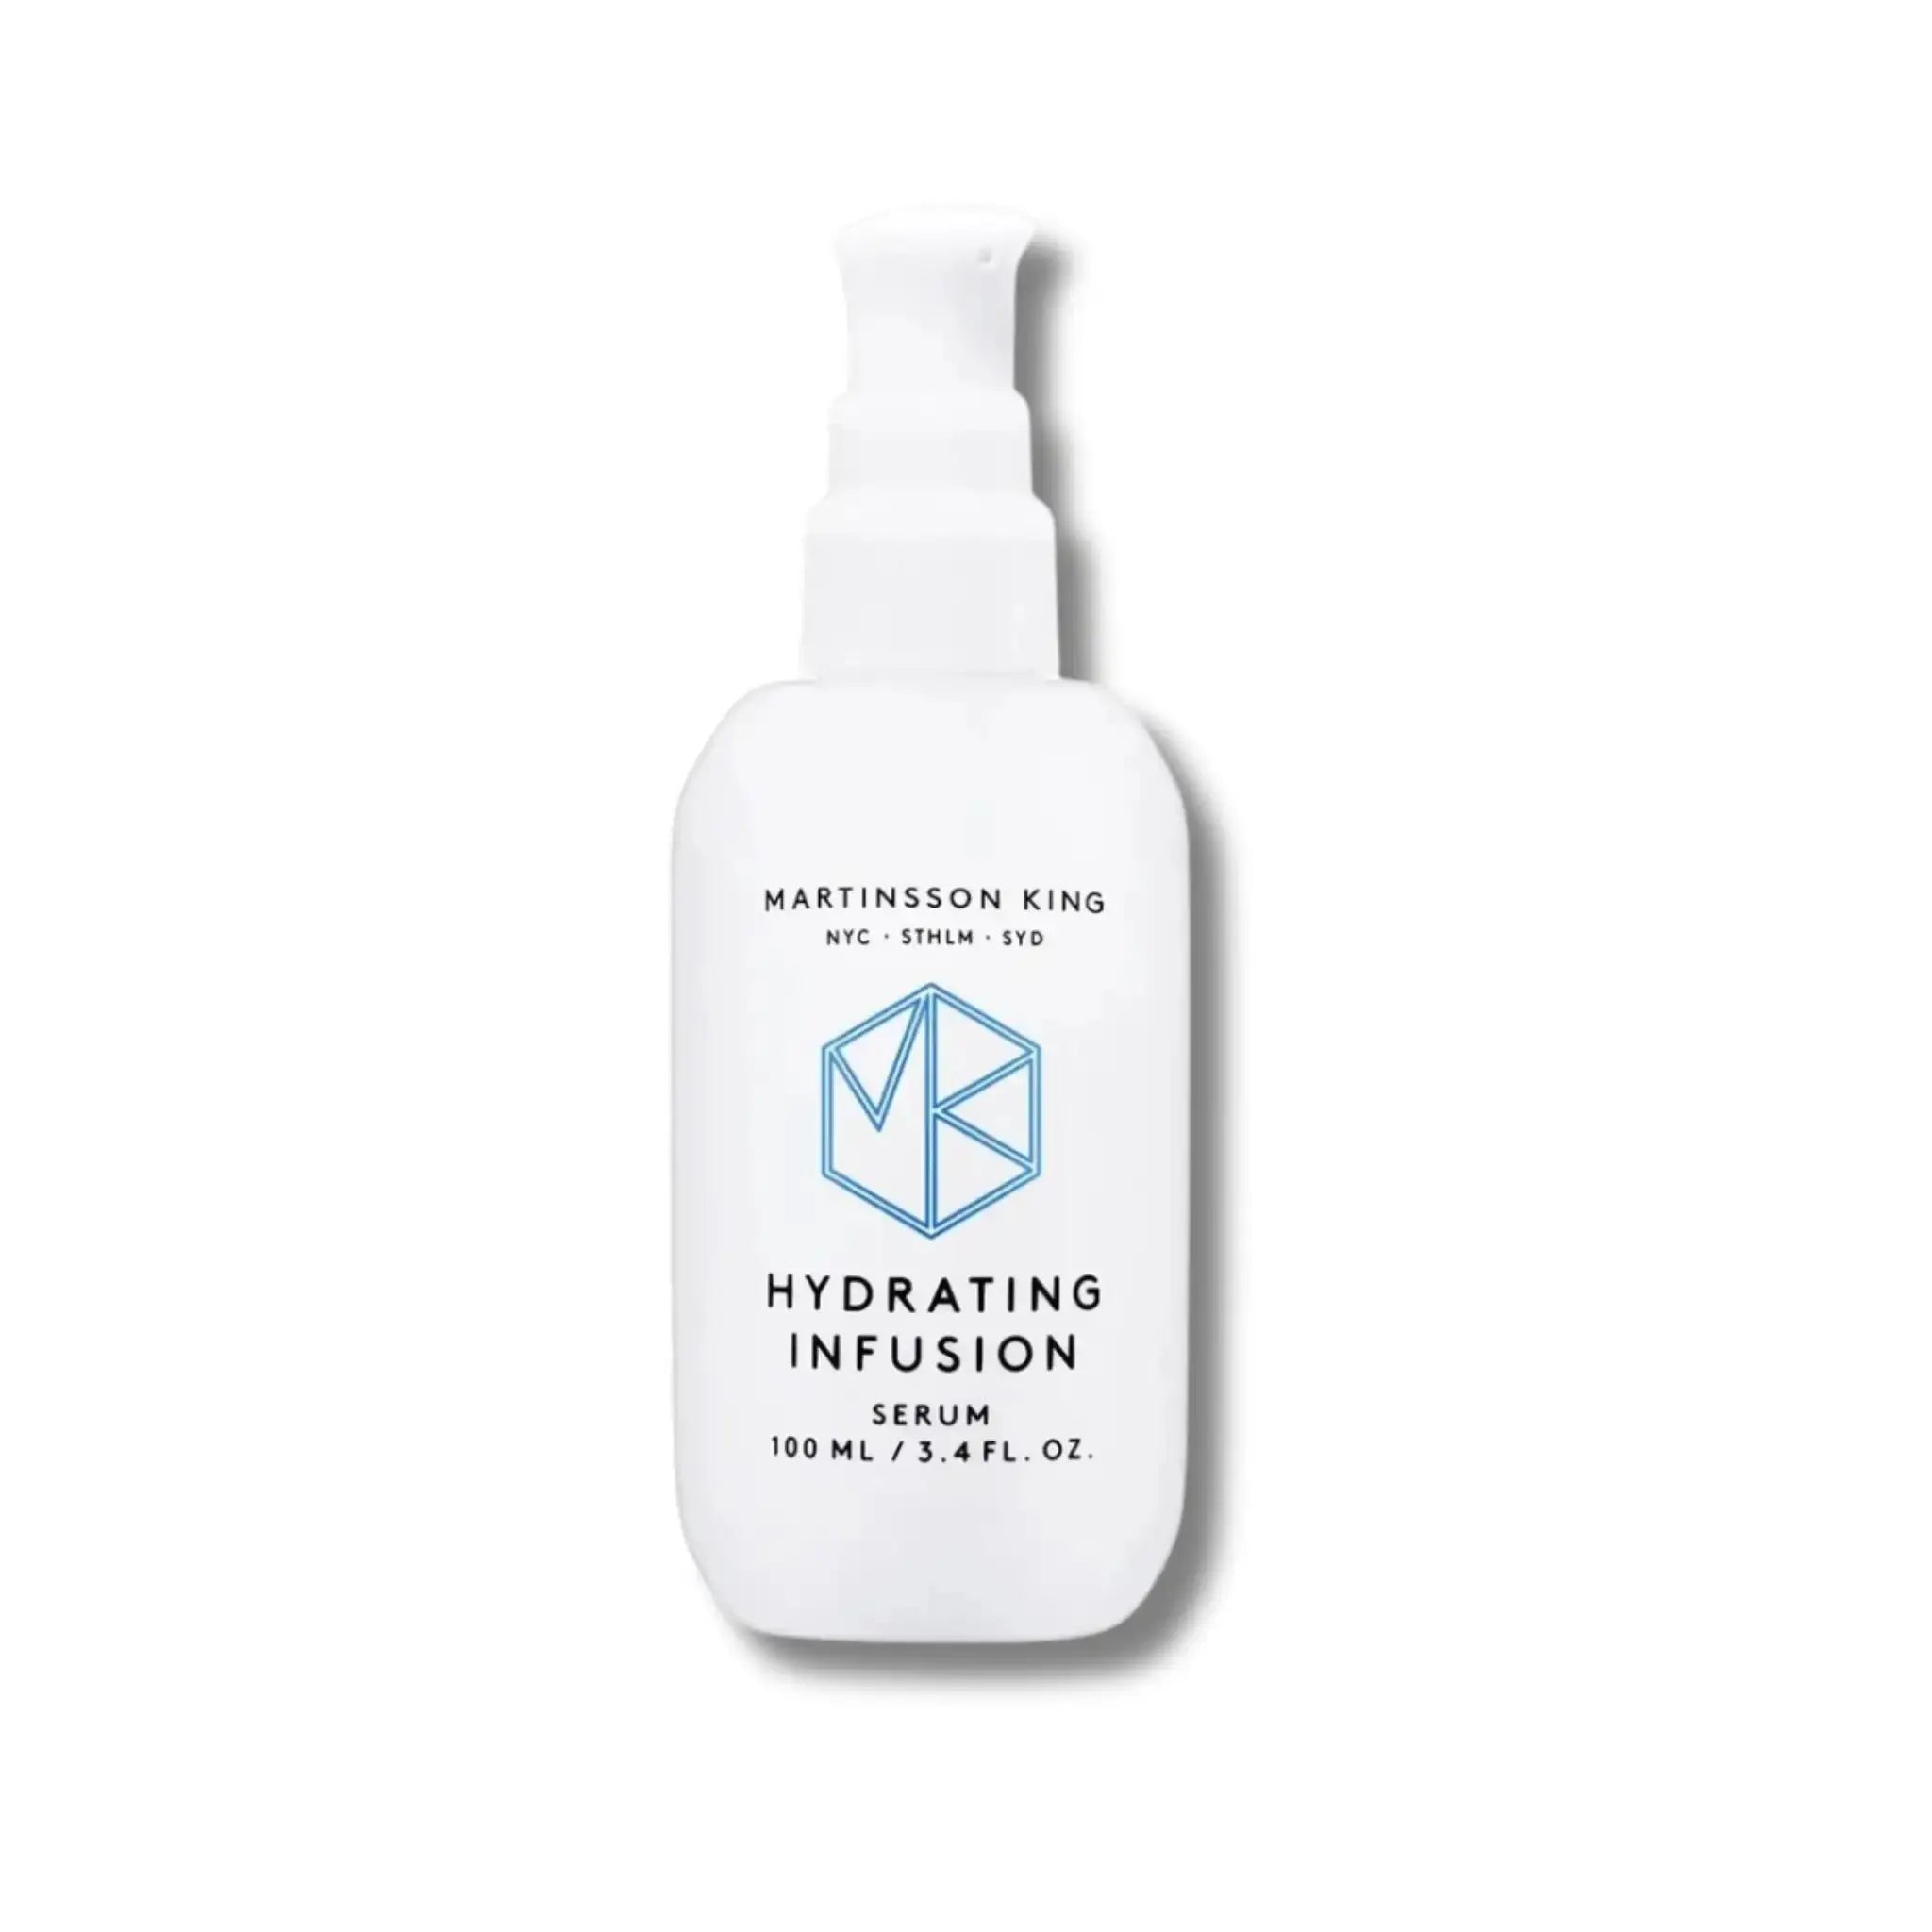 Sérum Hydratant Infusion MARTINSSON KING volumely